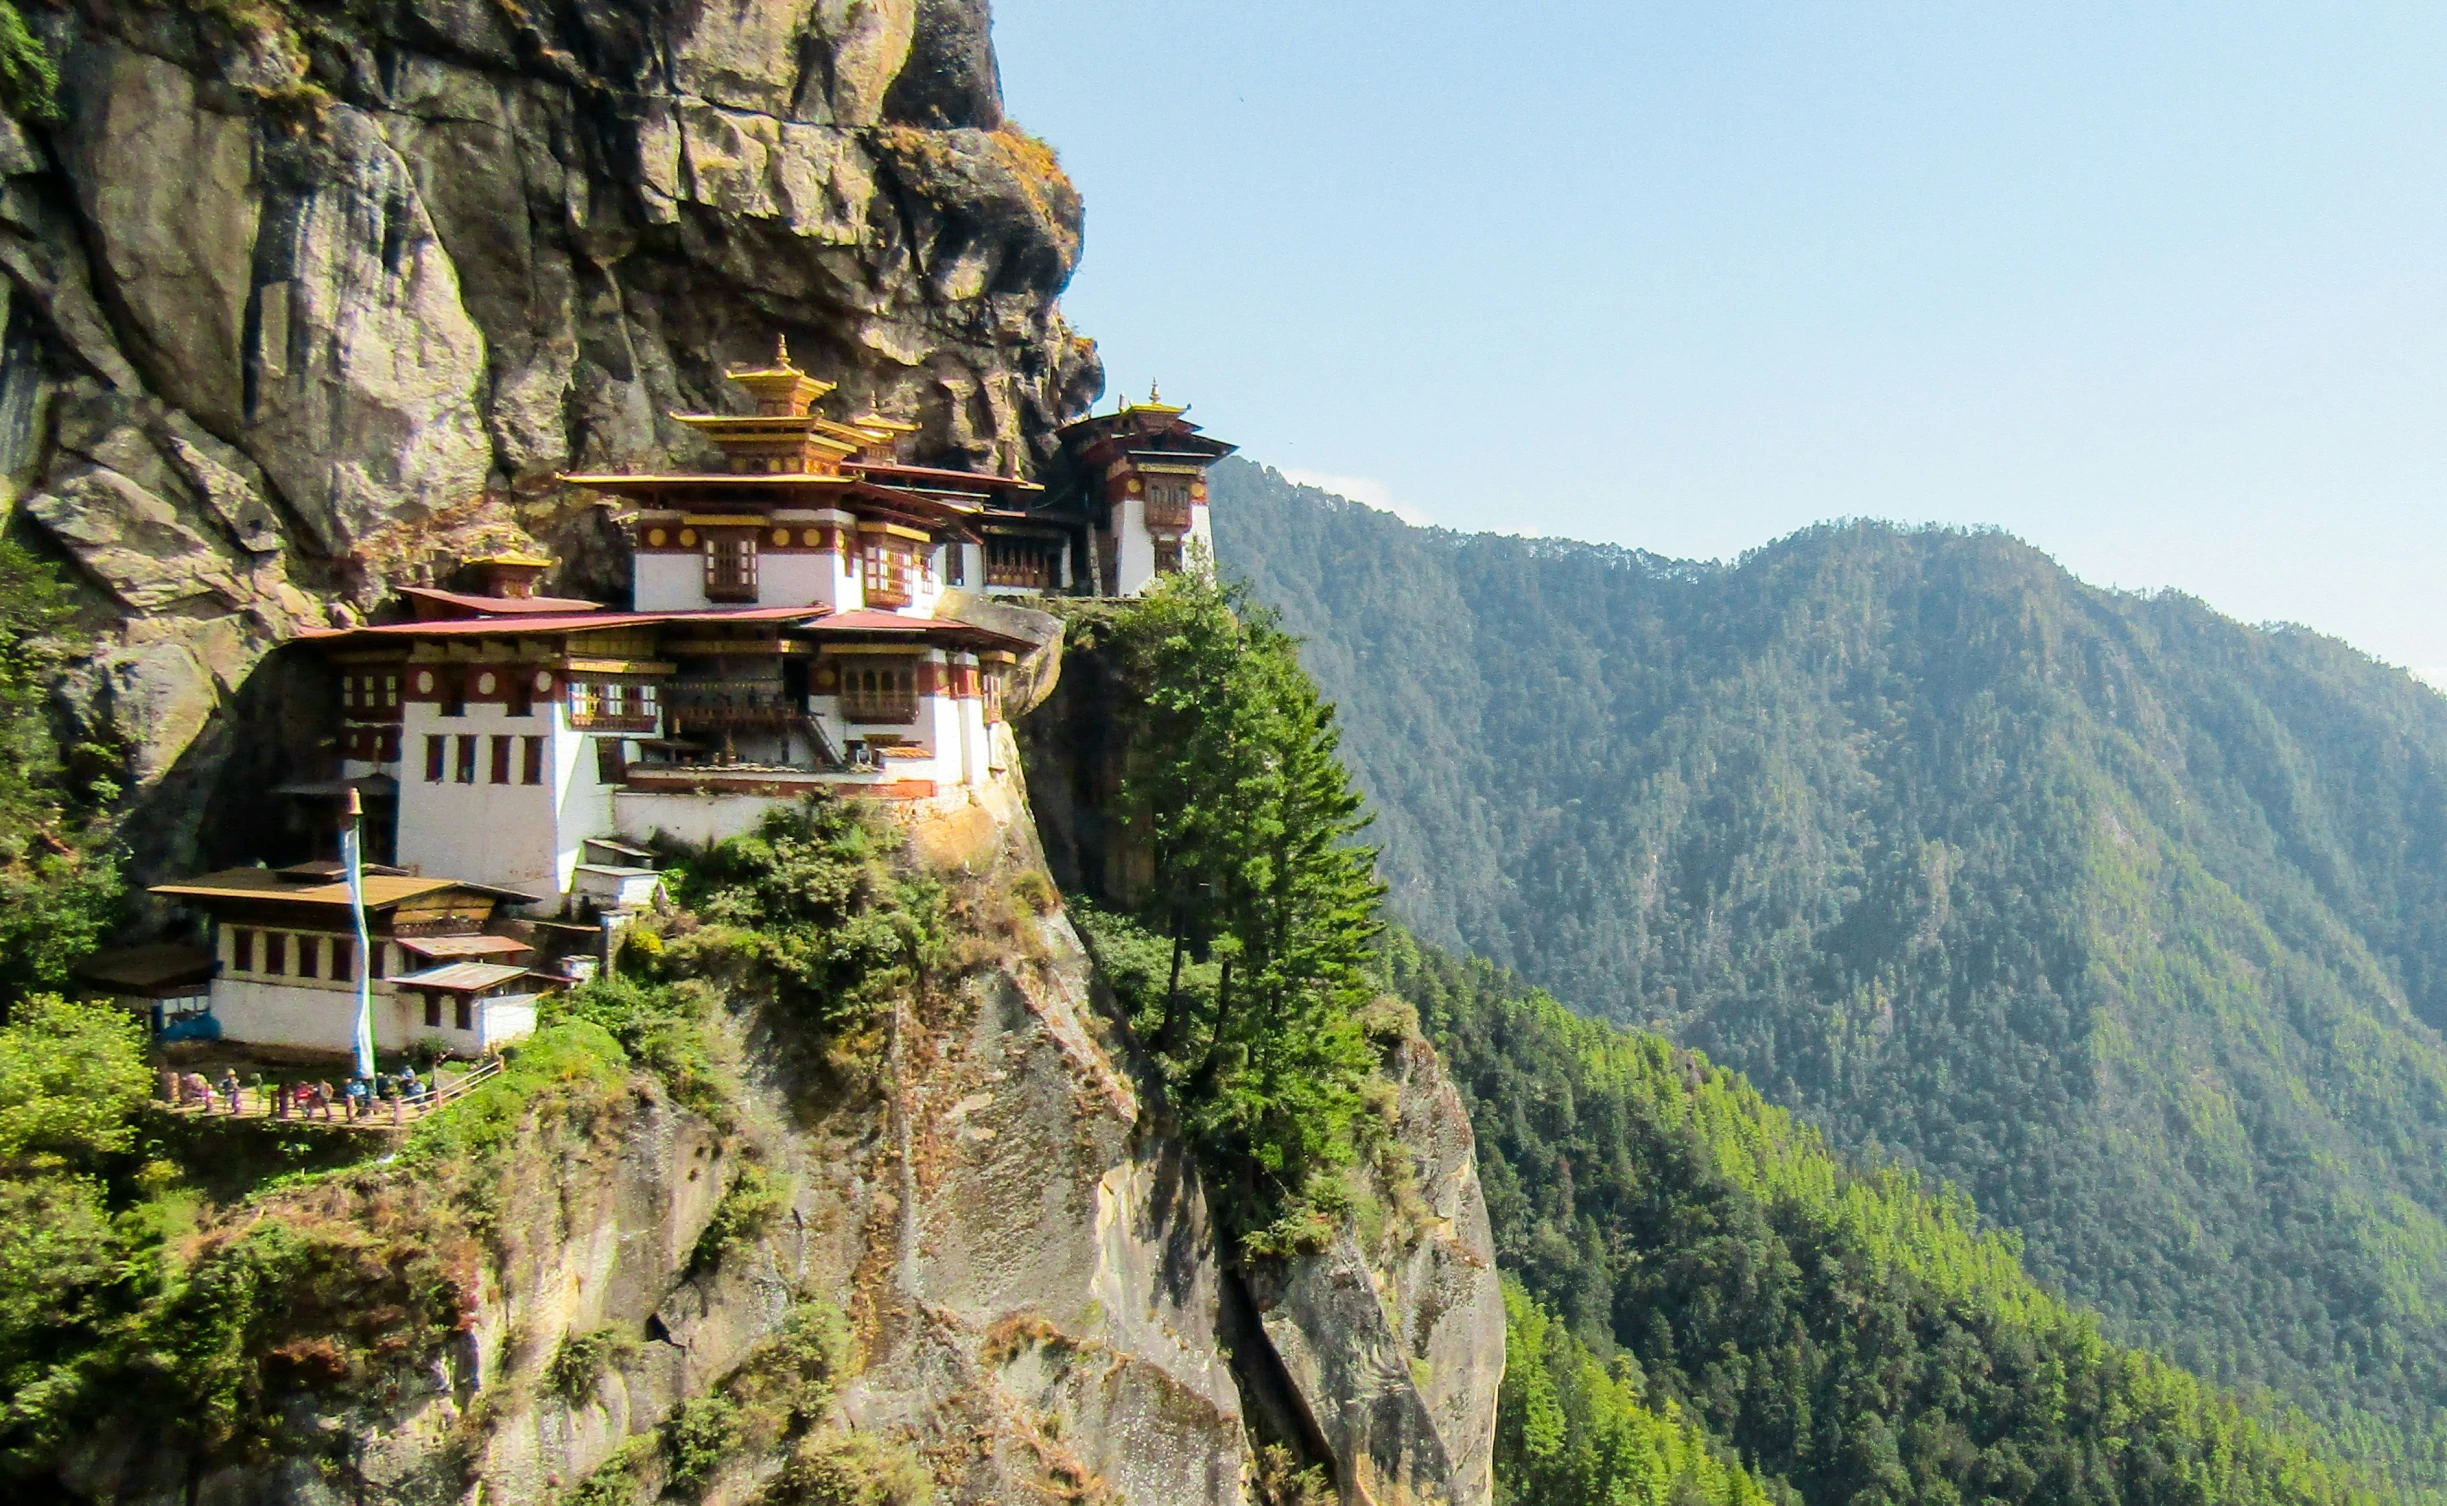 buddhist monastery perched on top of the cliff on a clear day